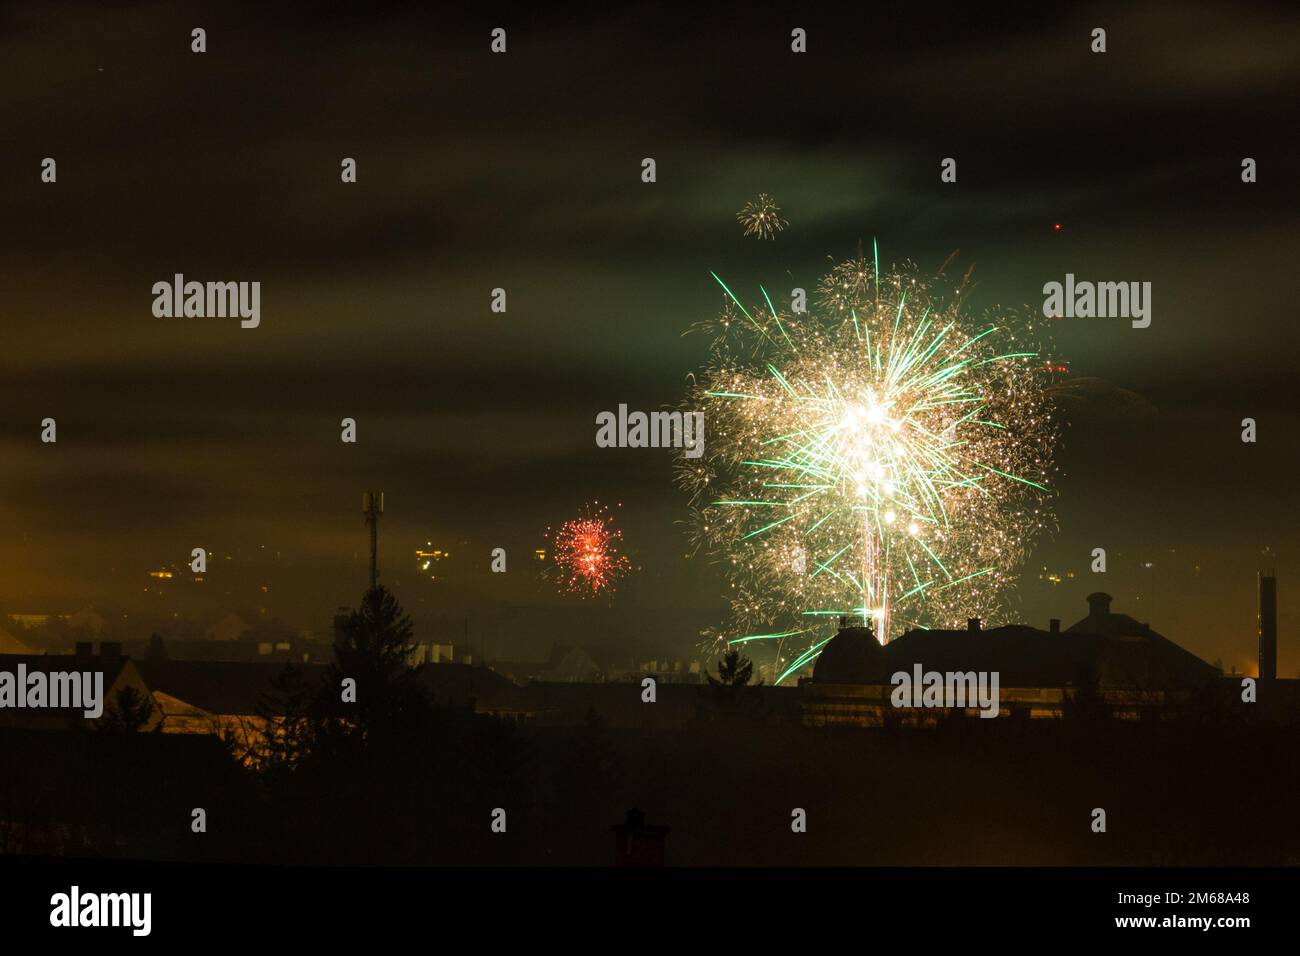 Fireworks at New Year's Eve at night, Sopron, Hungary Stock Photo